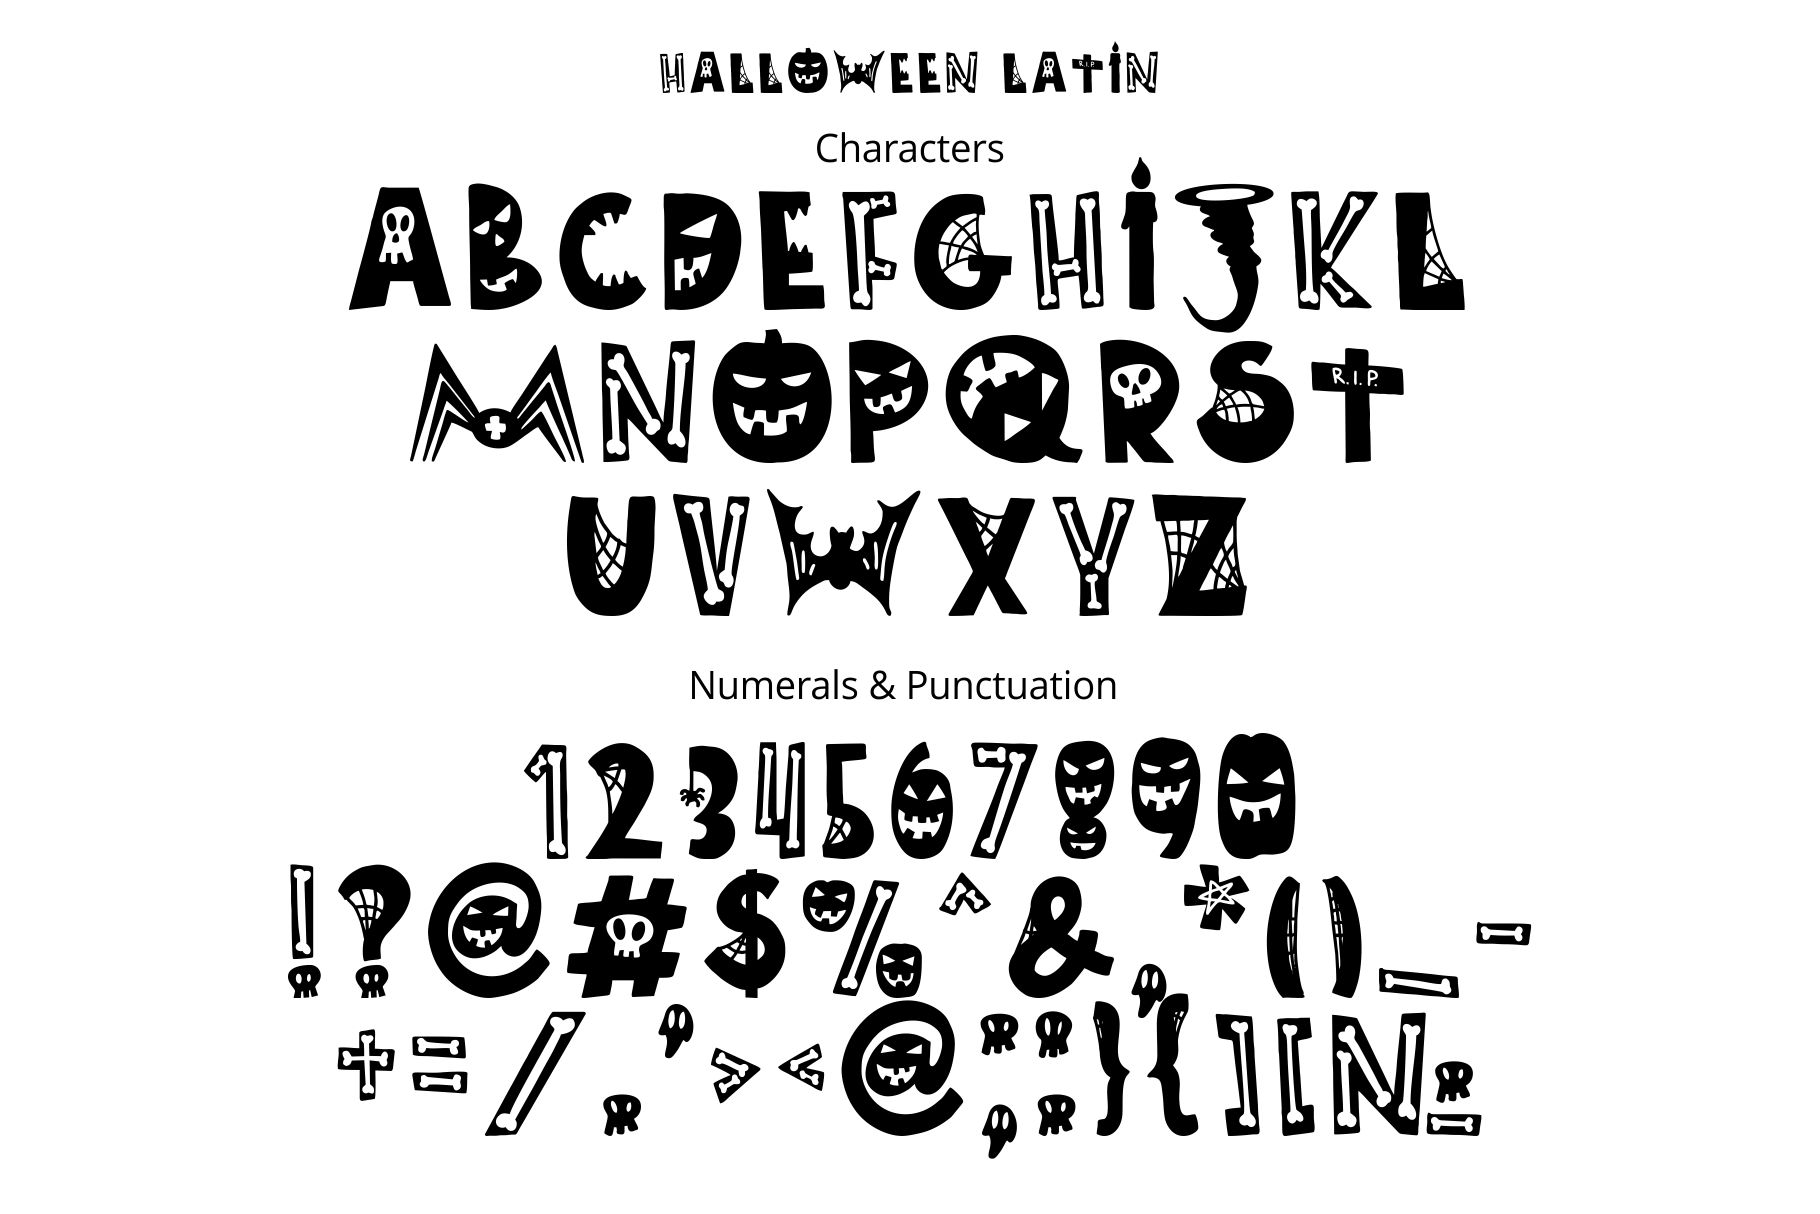 Latin letters in classic version with numerals & punctuation.